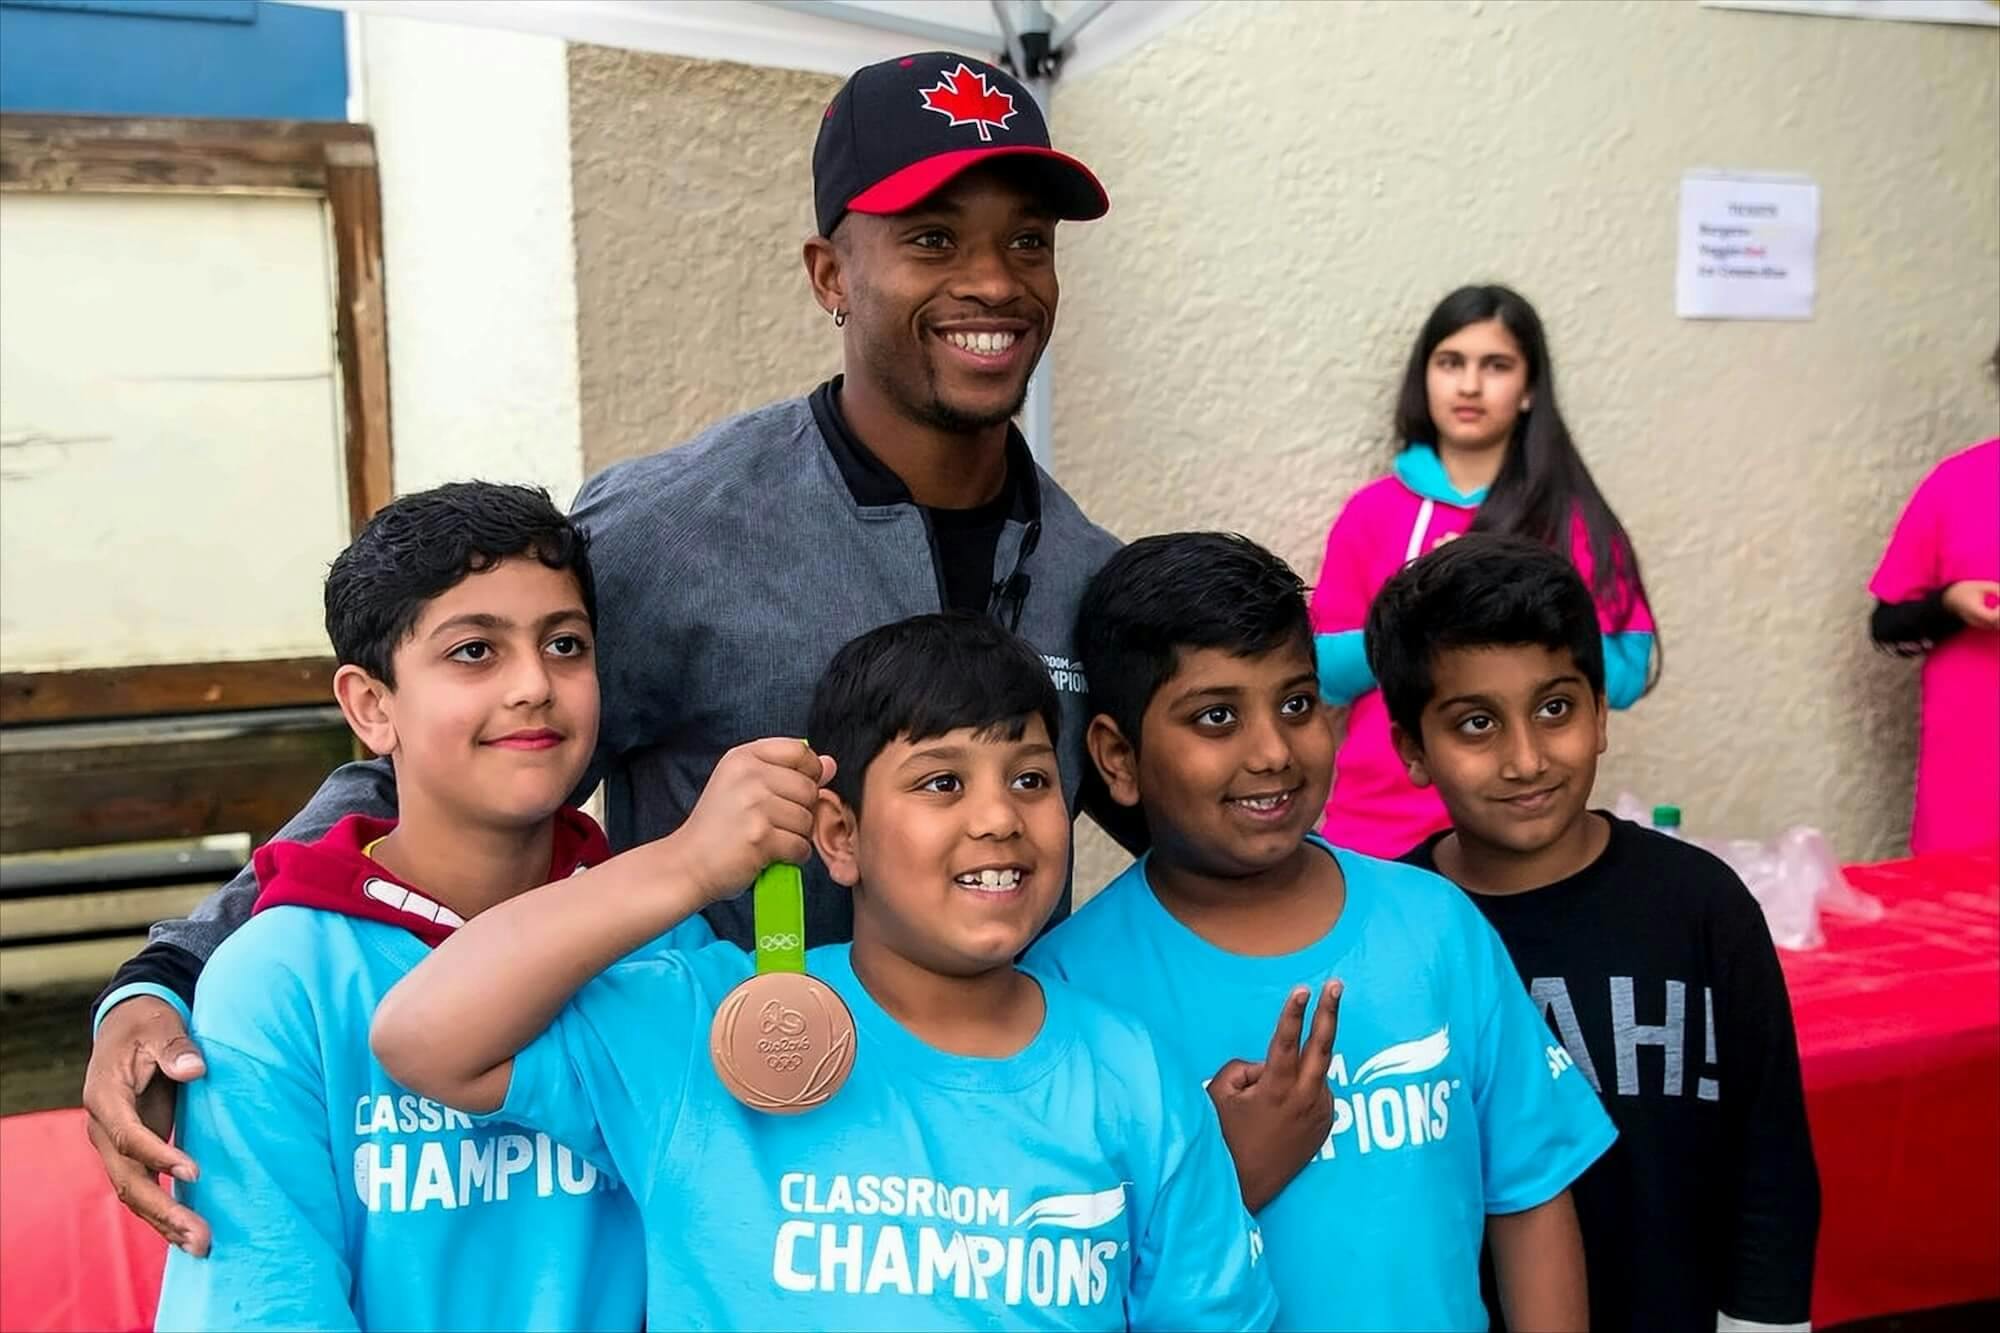 A group of photos pose with an athlete while holding his medal